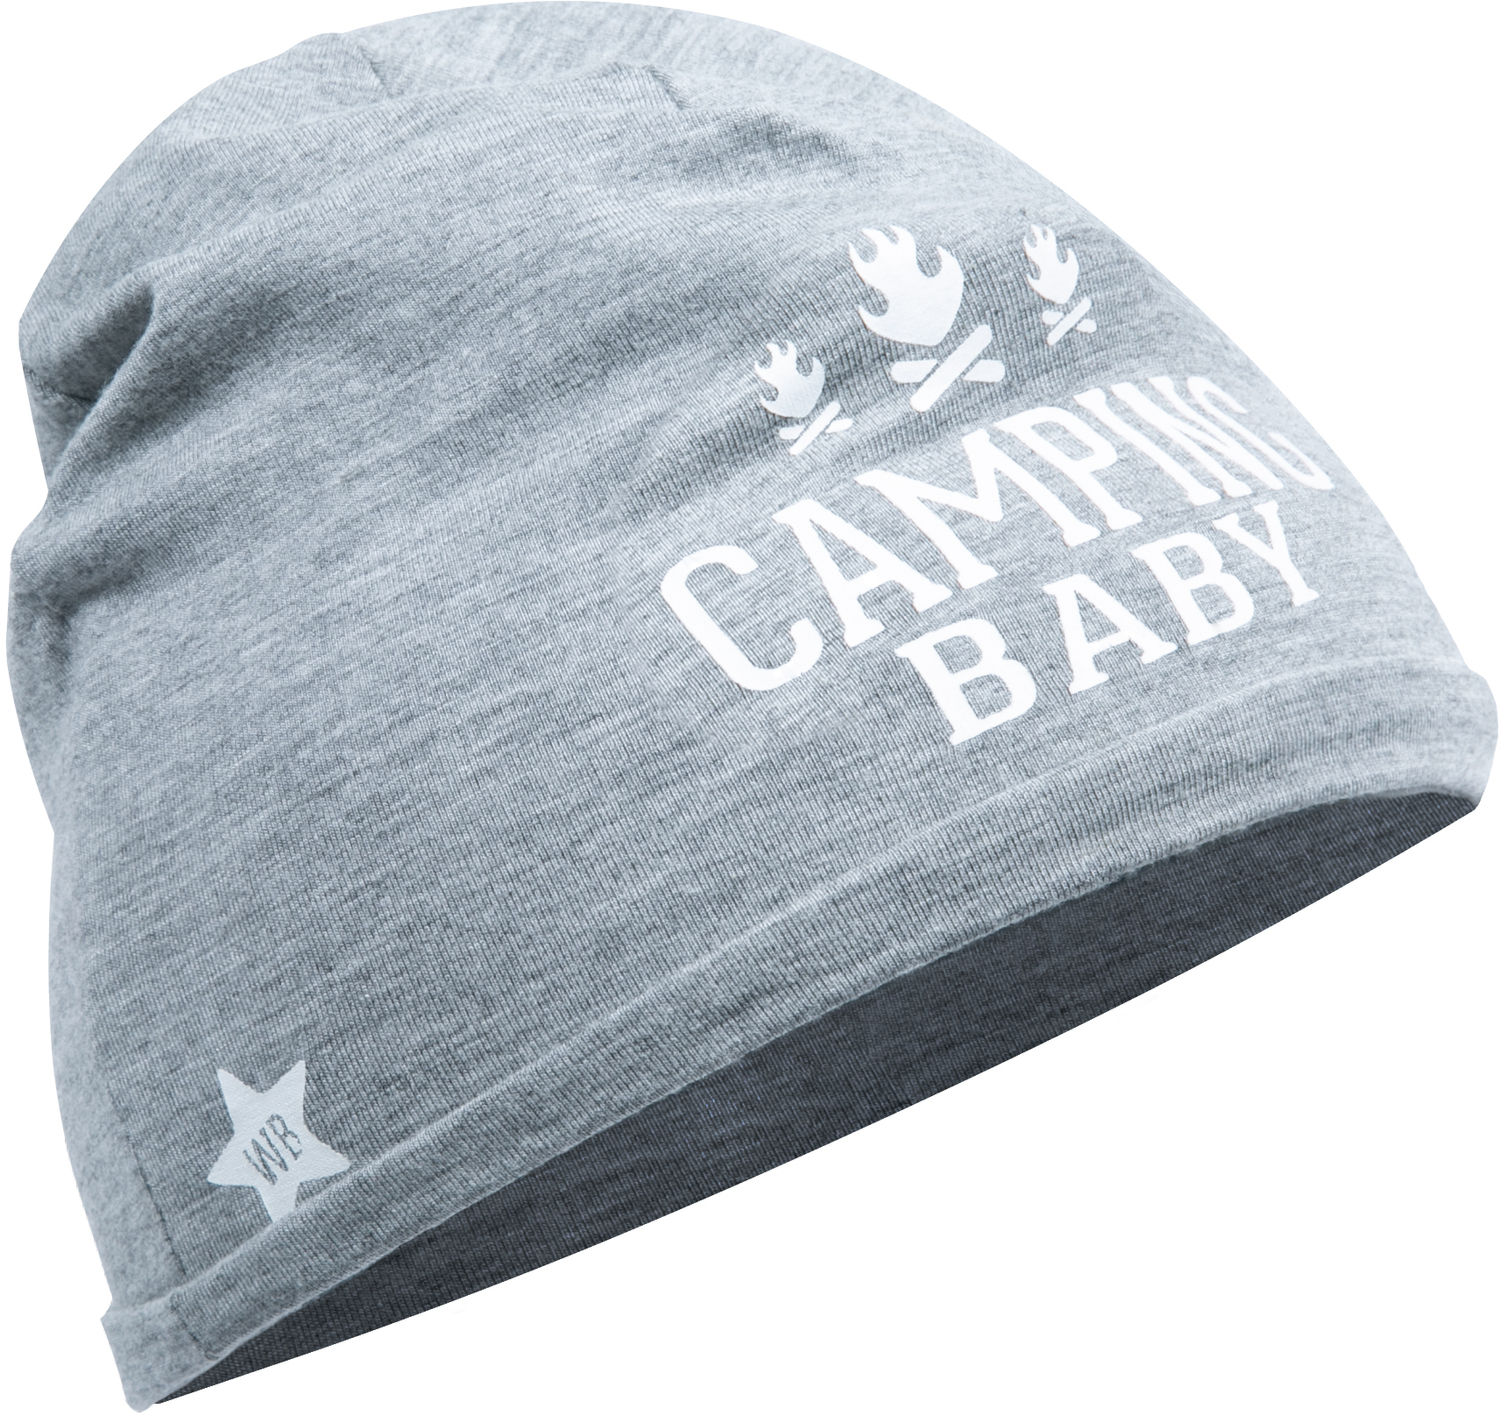 Camping by We Baby - Camping - Heathered Gray  Beanie
(0-12 Months)